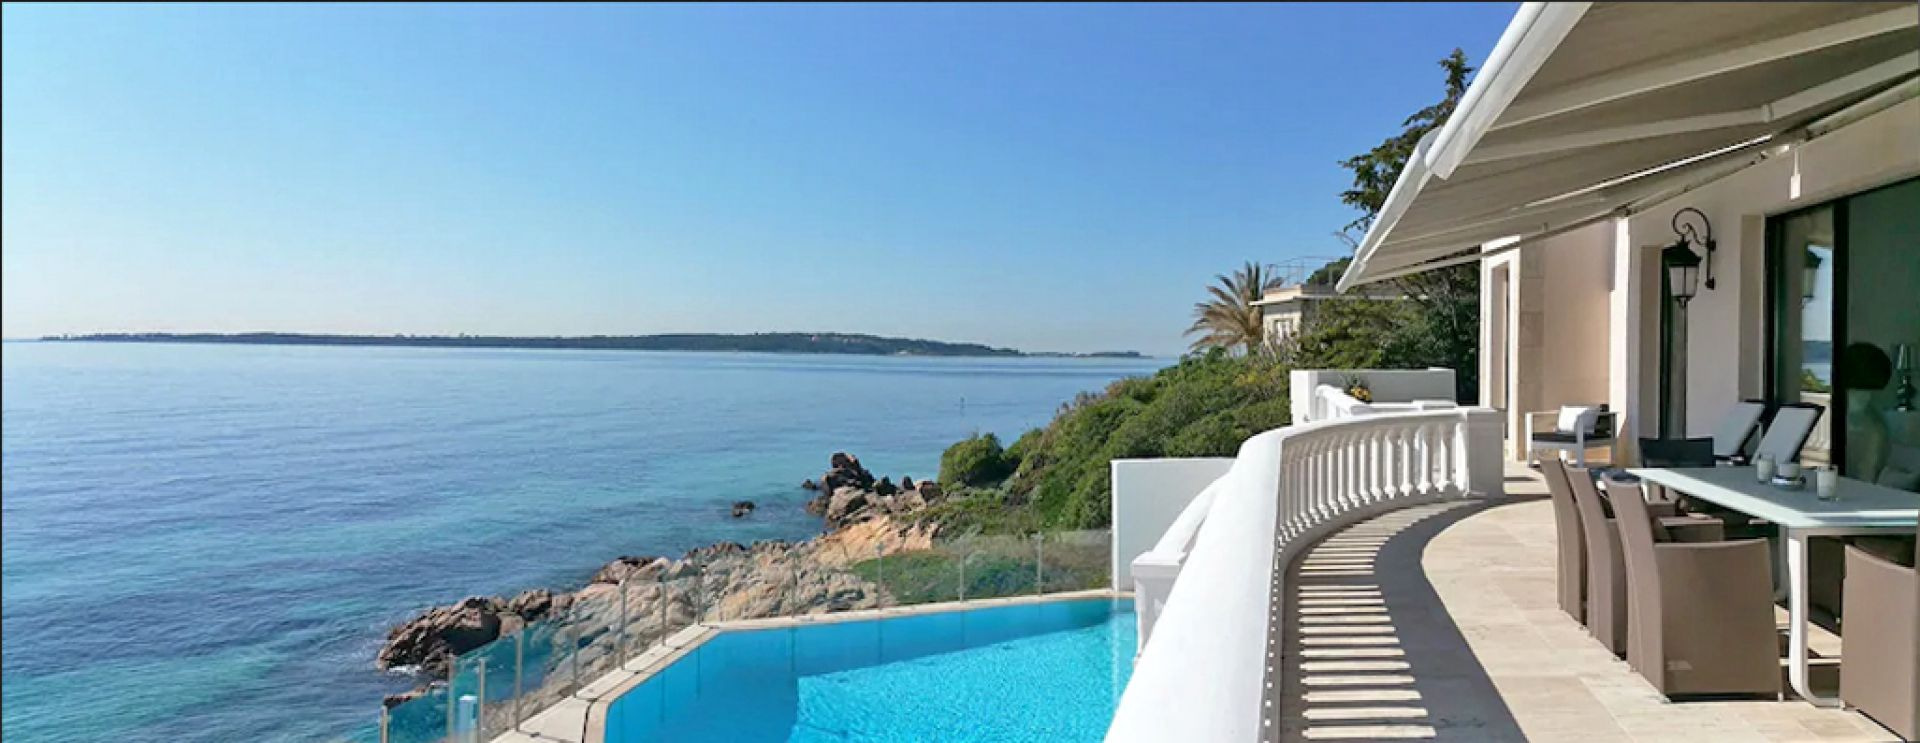 Cannes Waterfront Villa with Private Berth and Panoramic Sea Views